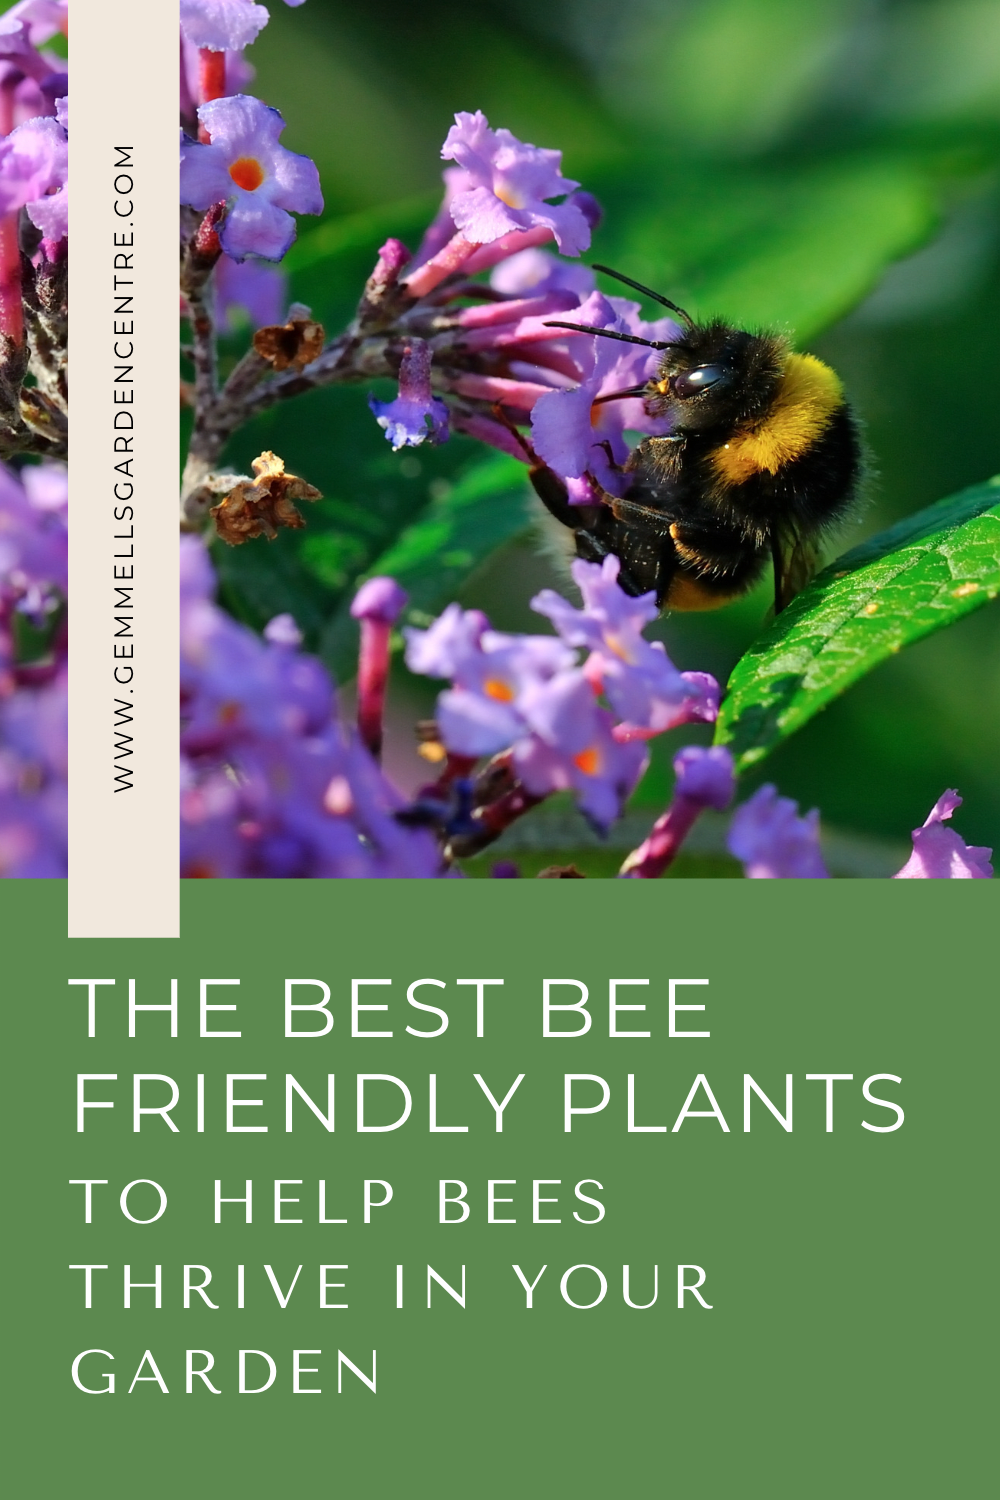 Bee Friendly Plants to attract and help bees thrive in your backyard garden